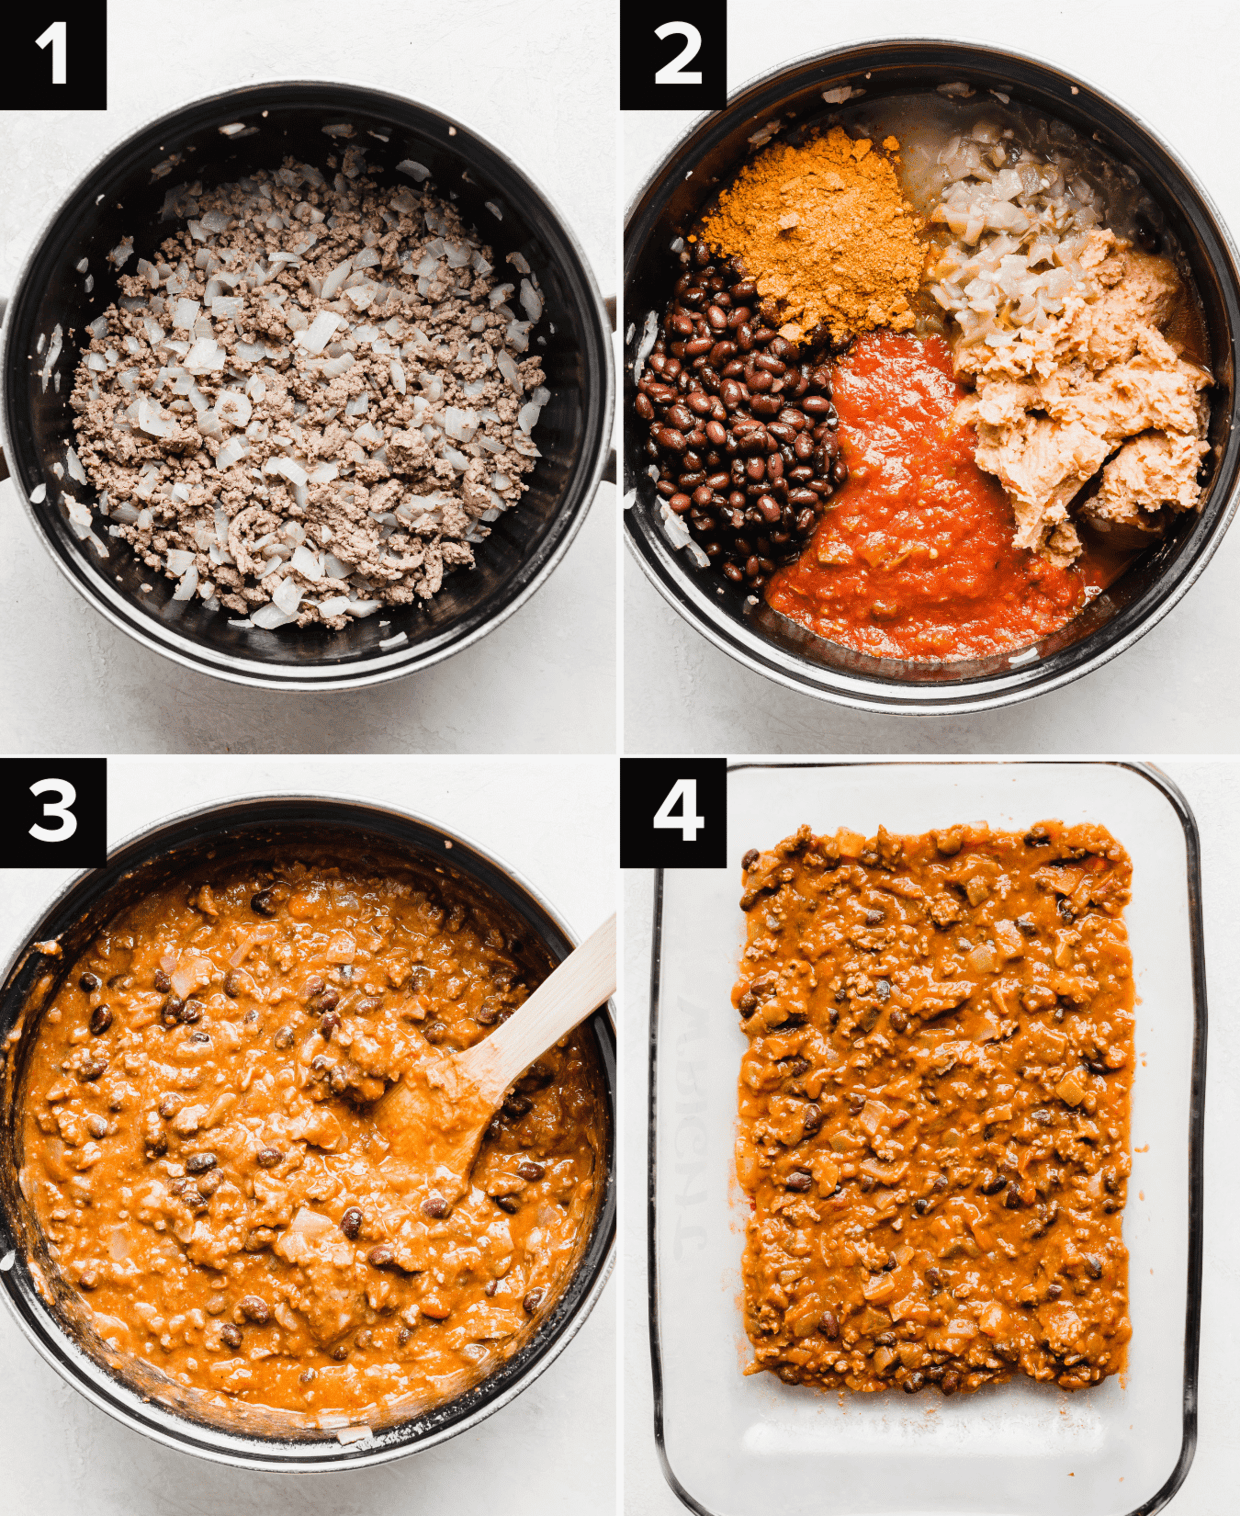 Four images showing how to make Mexican Lasagna using a meat sauce with beans.